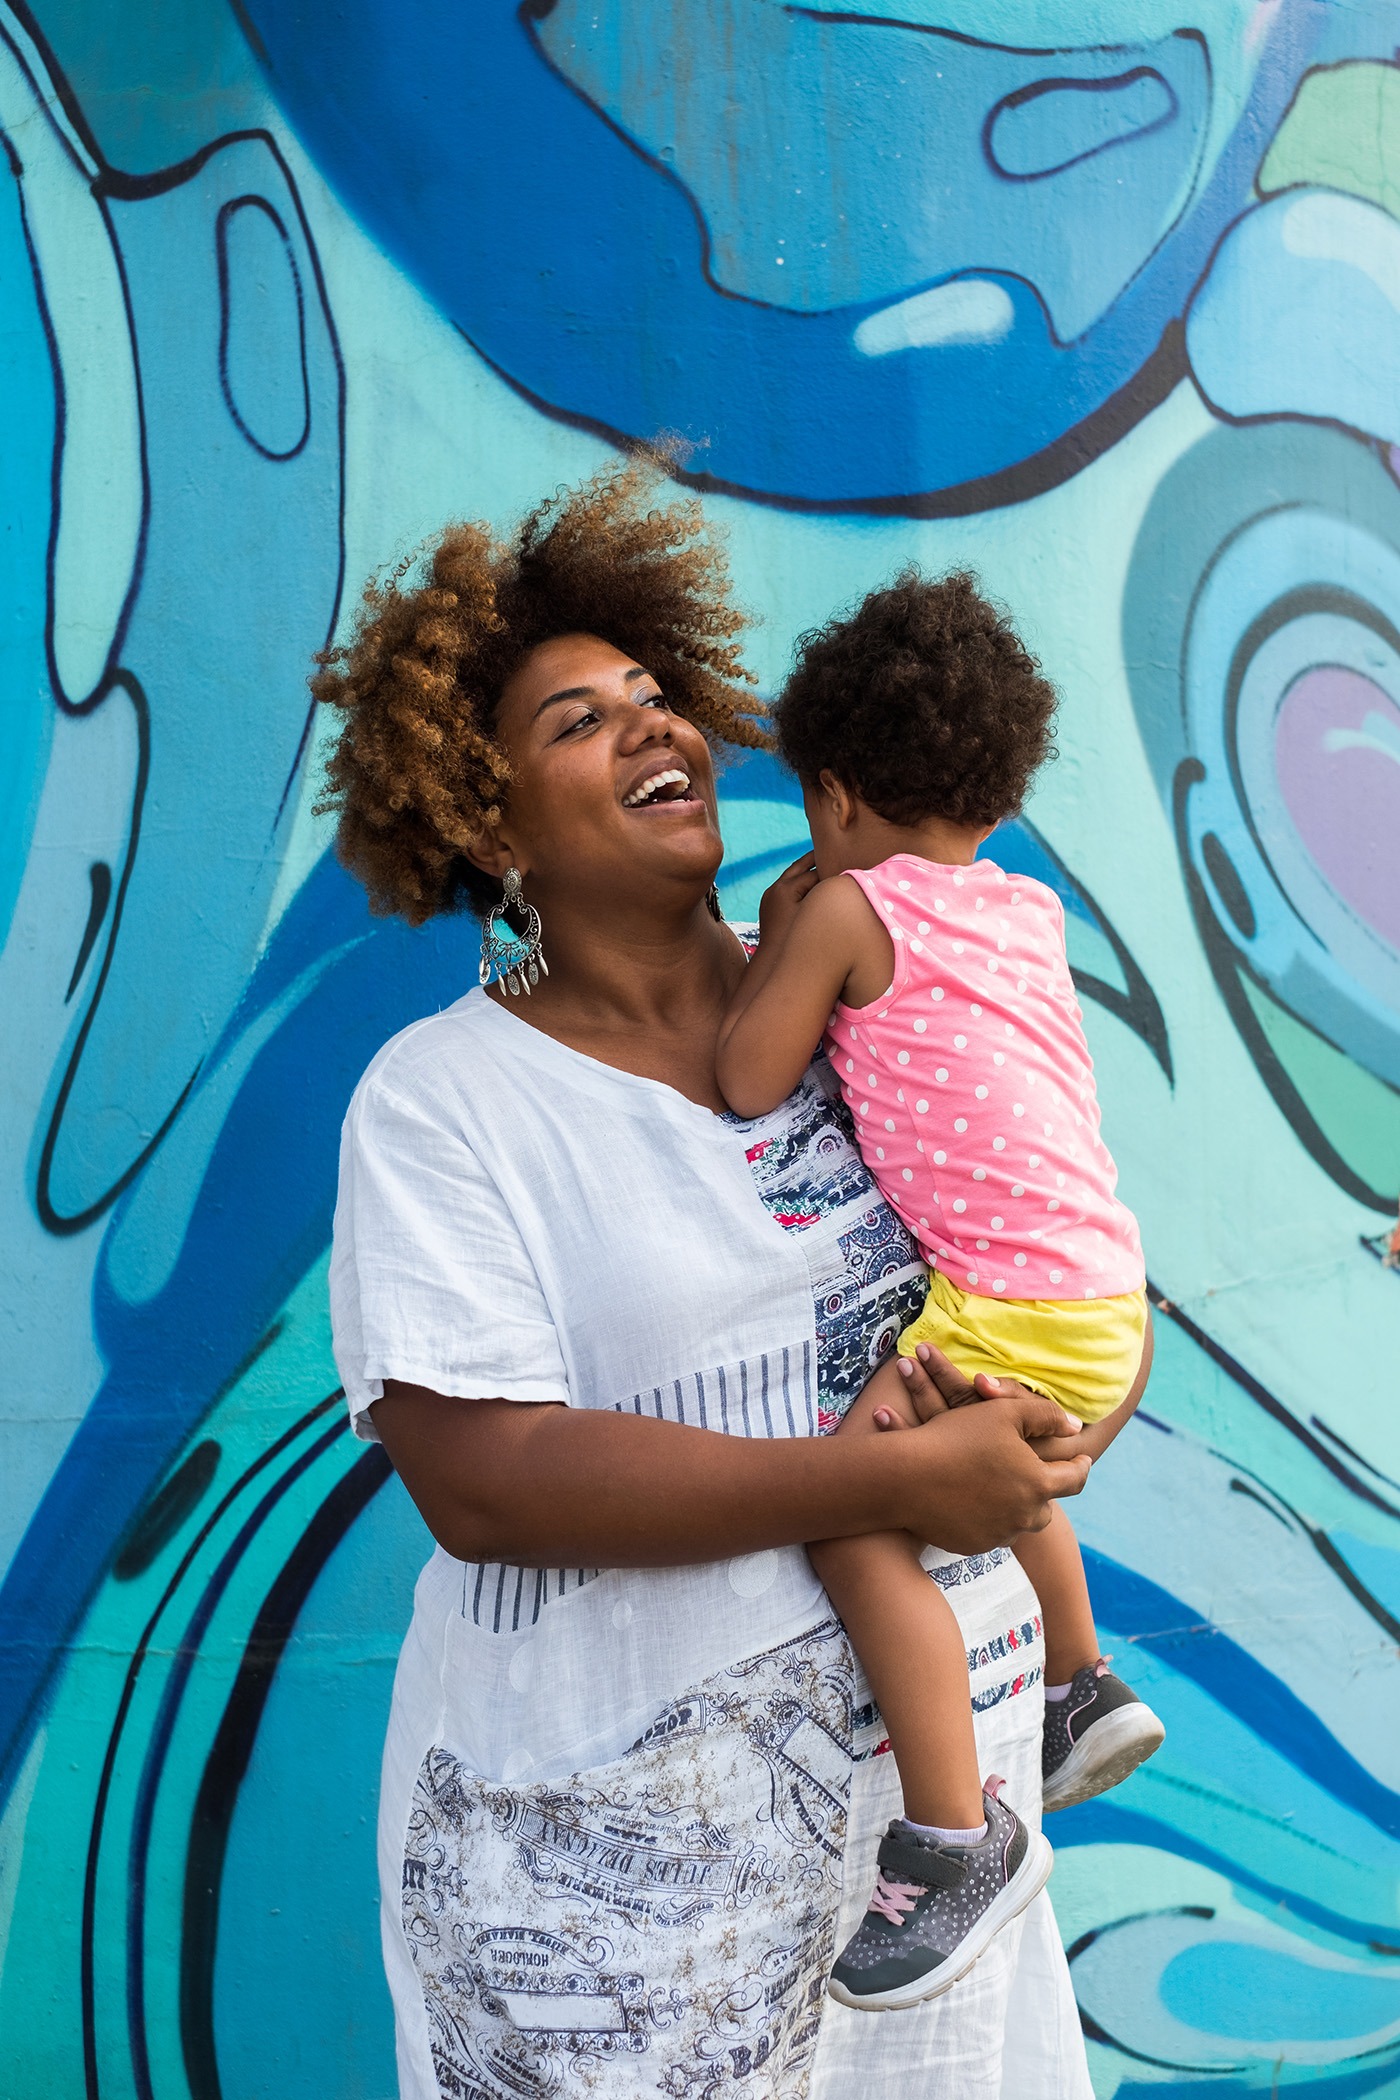 Smiling woman with standing in front of the wall with graffiti and holding an anonymous two-year-old child.